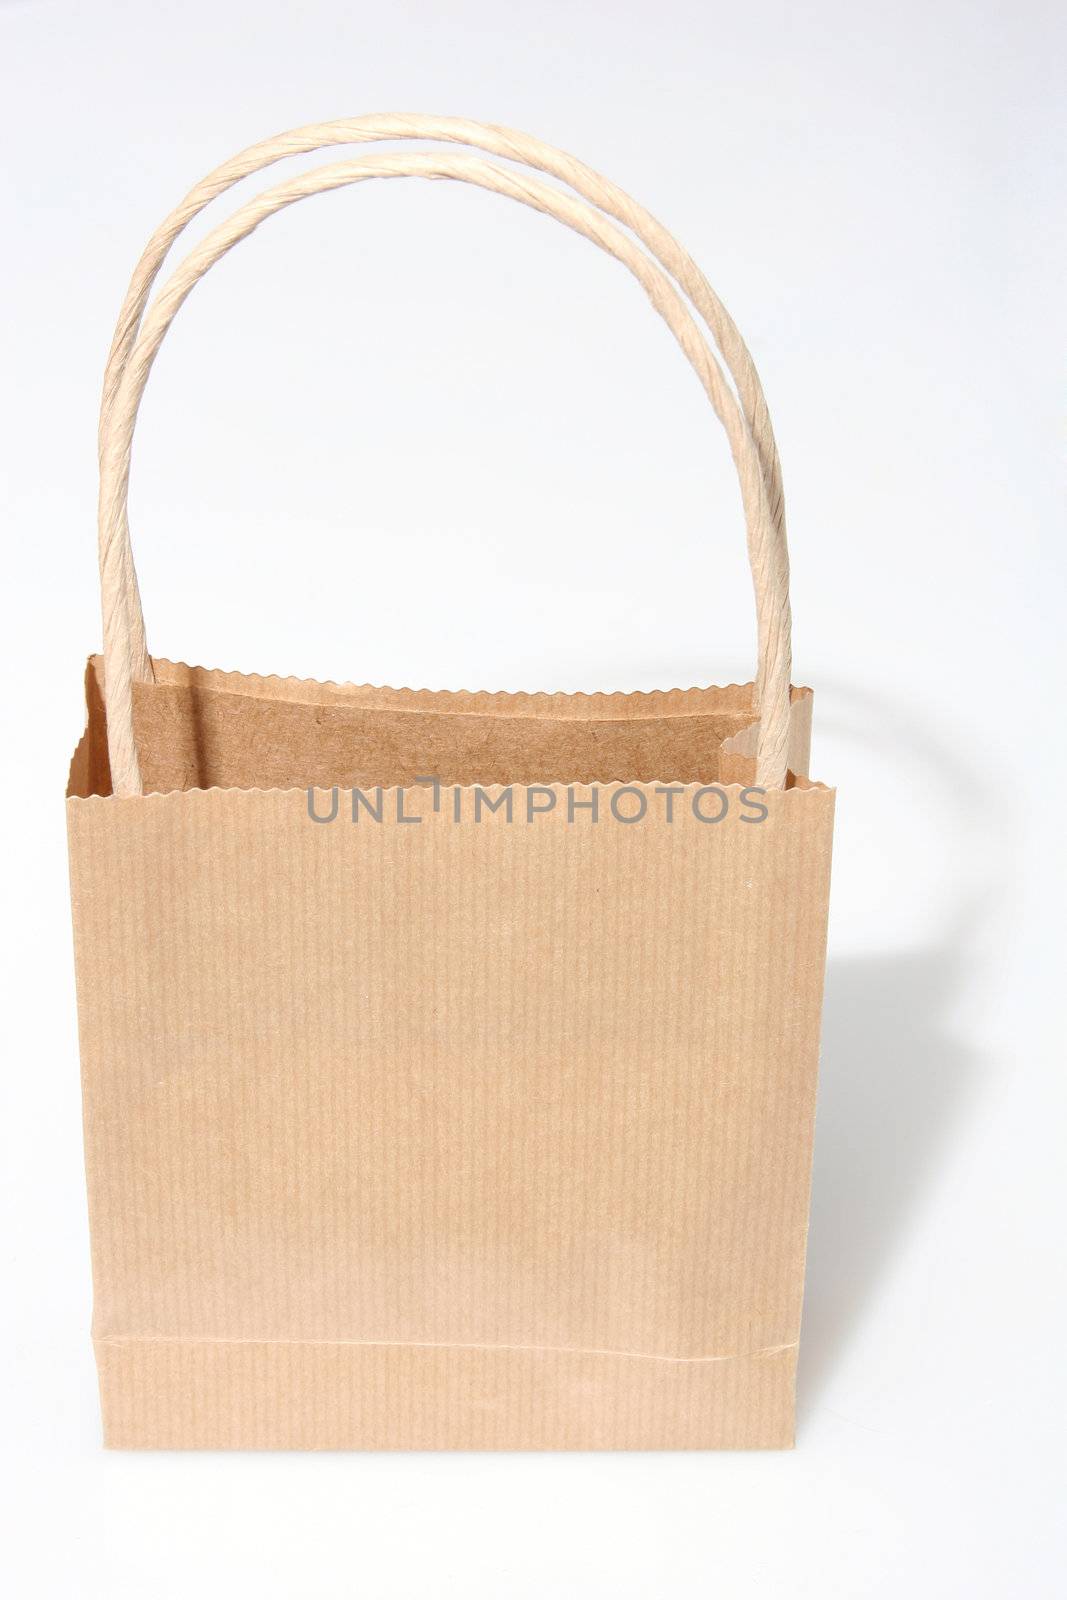 Empty brown paperbag isolated on white, perfect to put your design on the side, frontal view